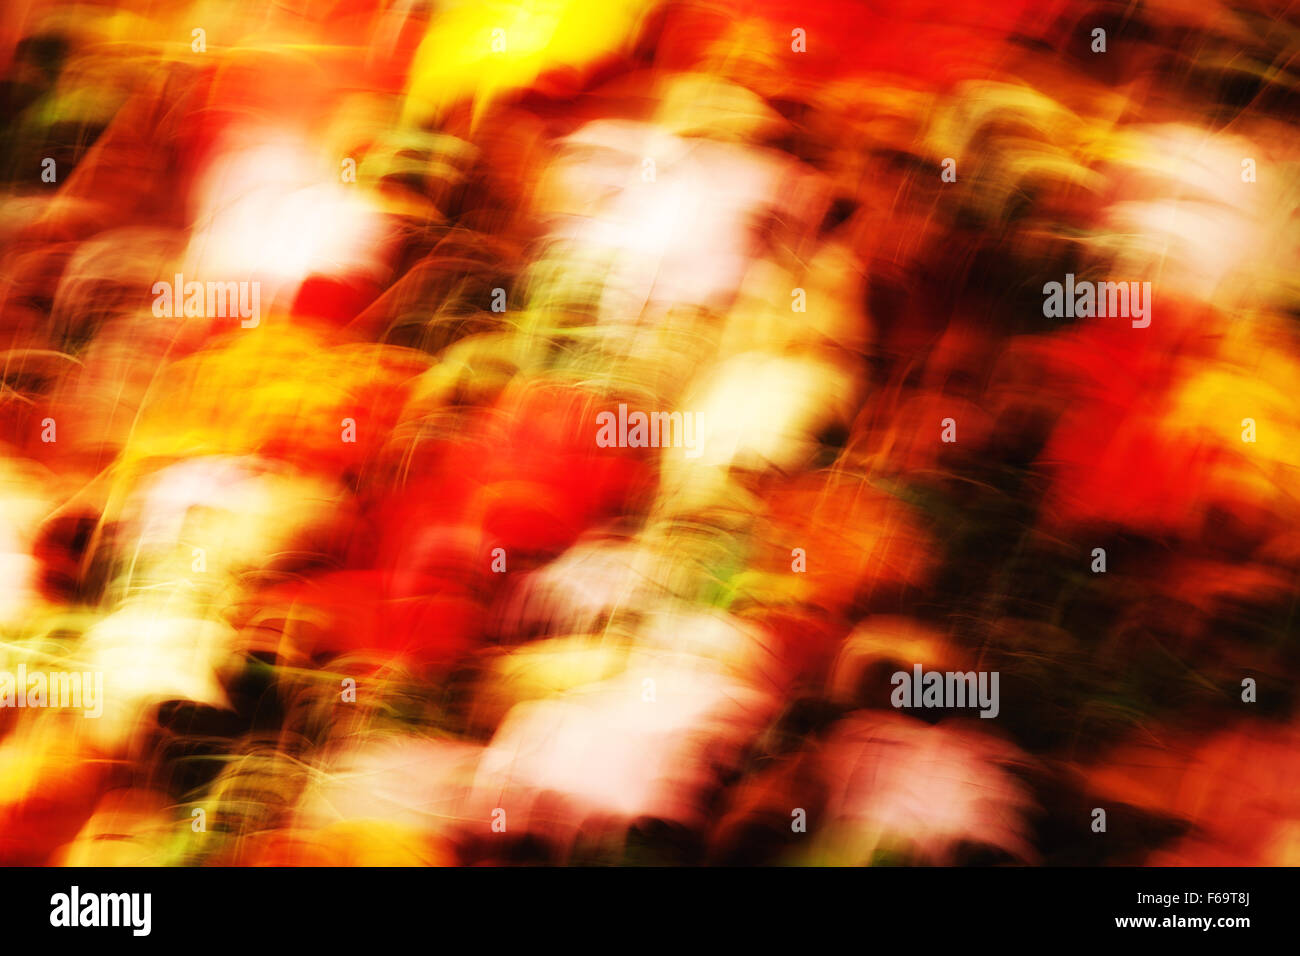 Colourful abstract background pattern of autumn leaves with motion blur, New England USA Stock Photo